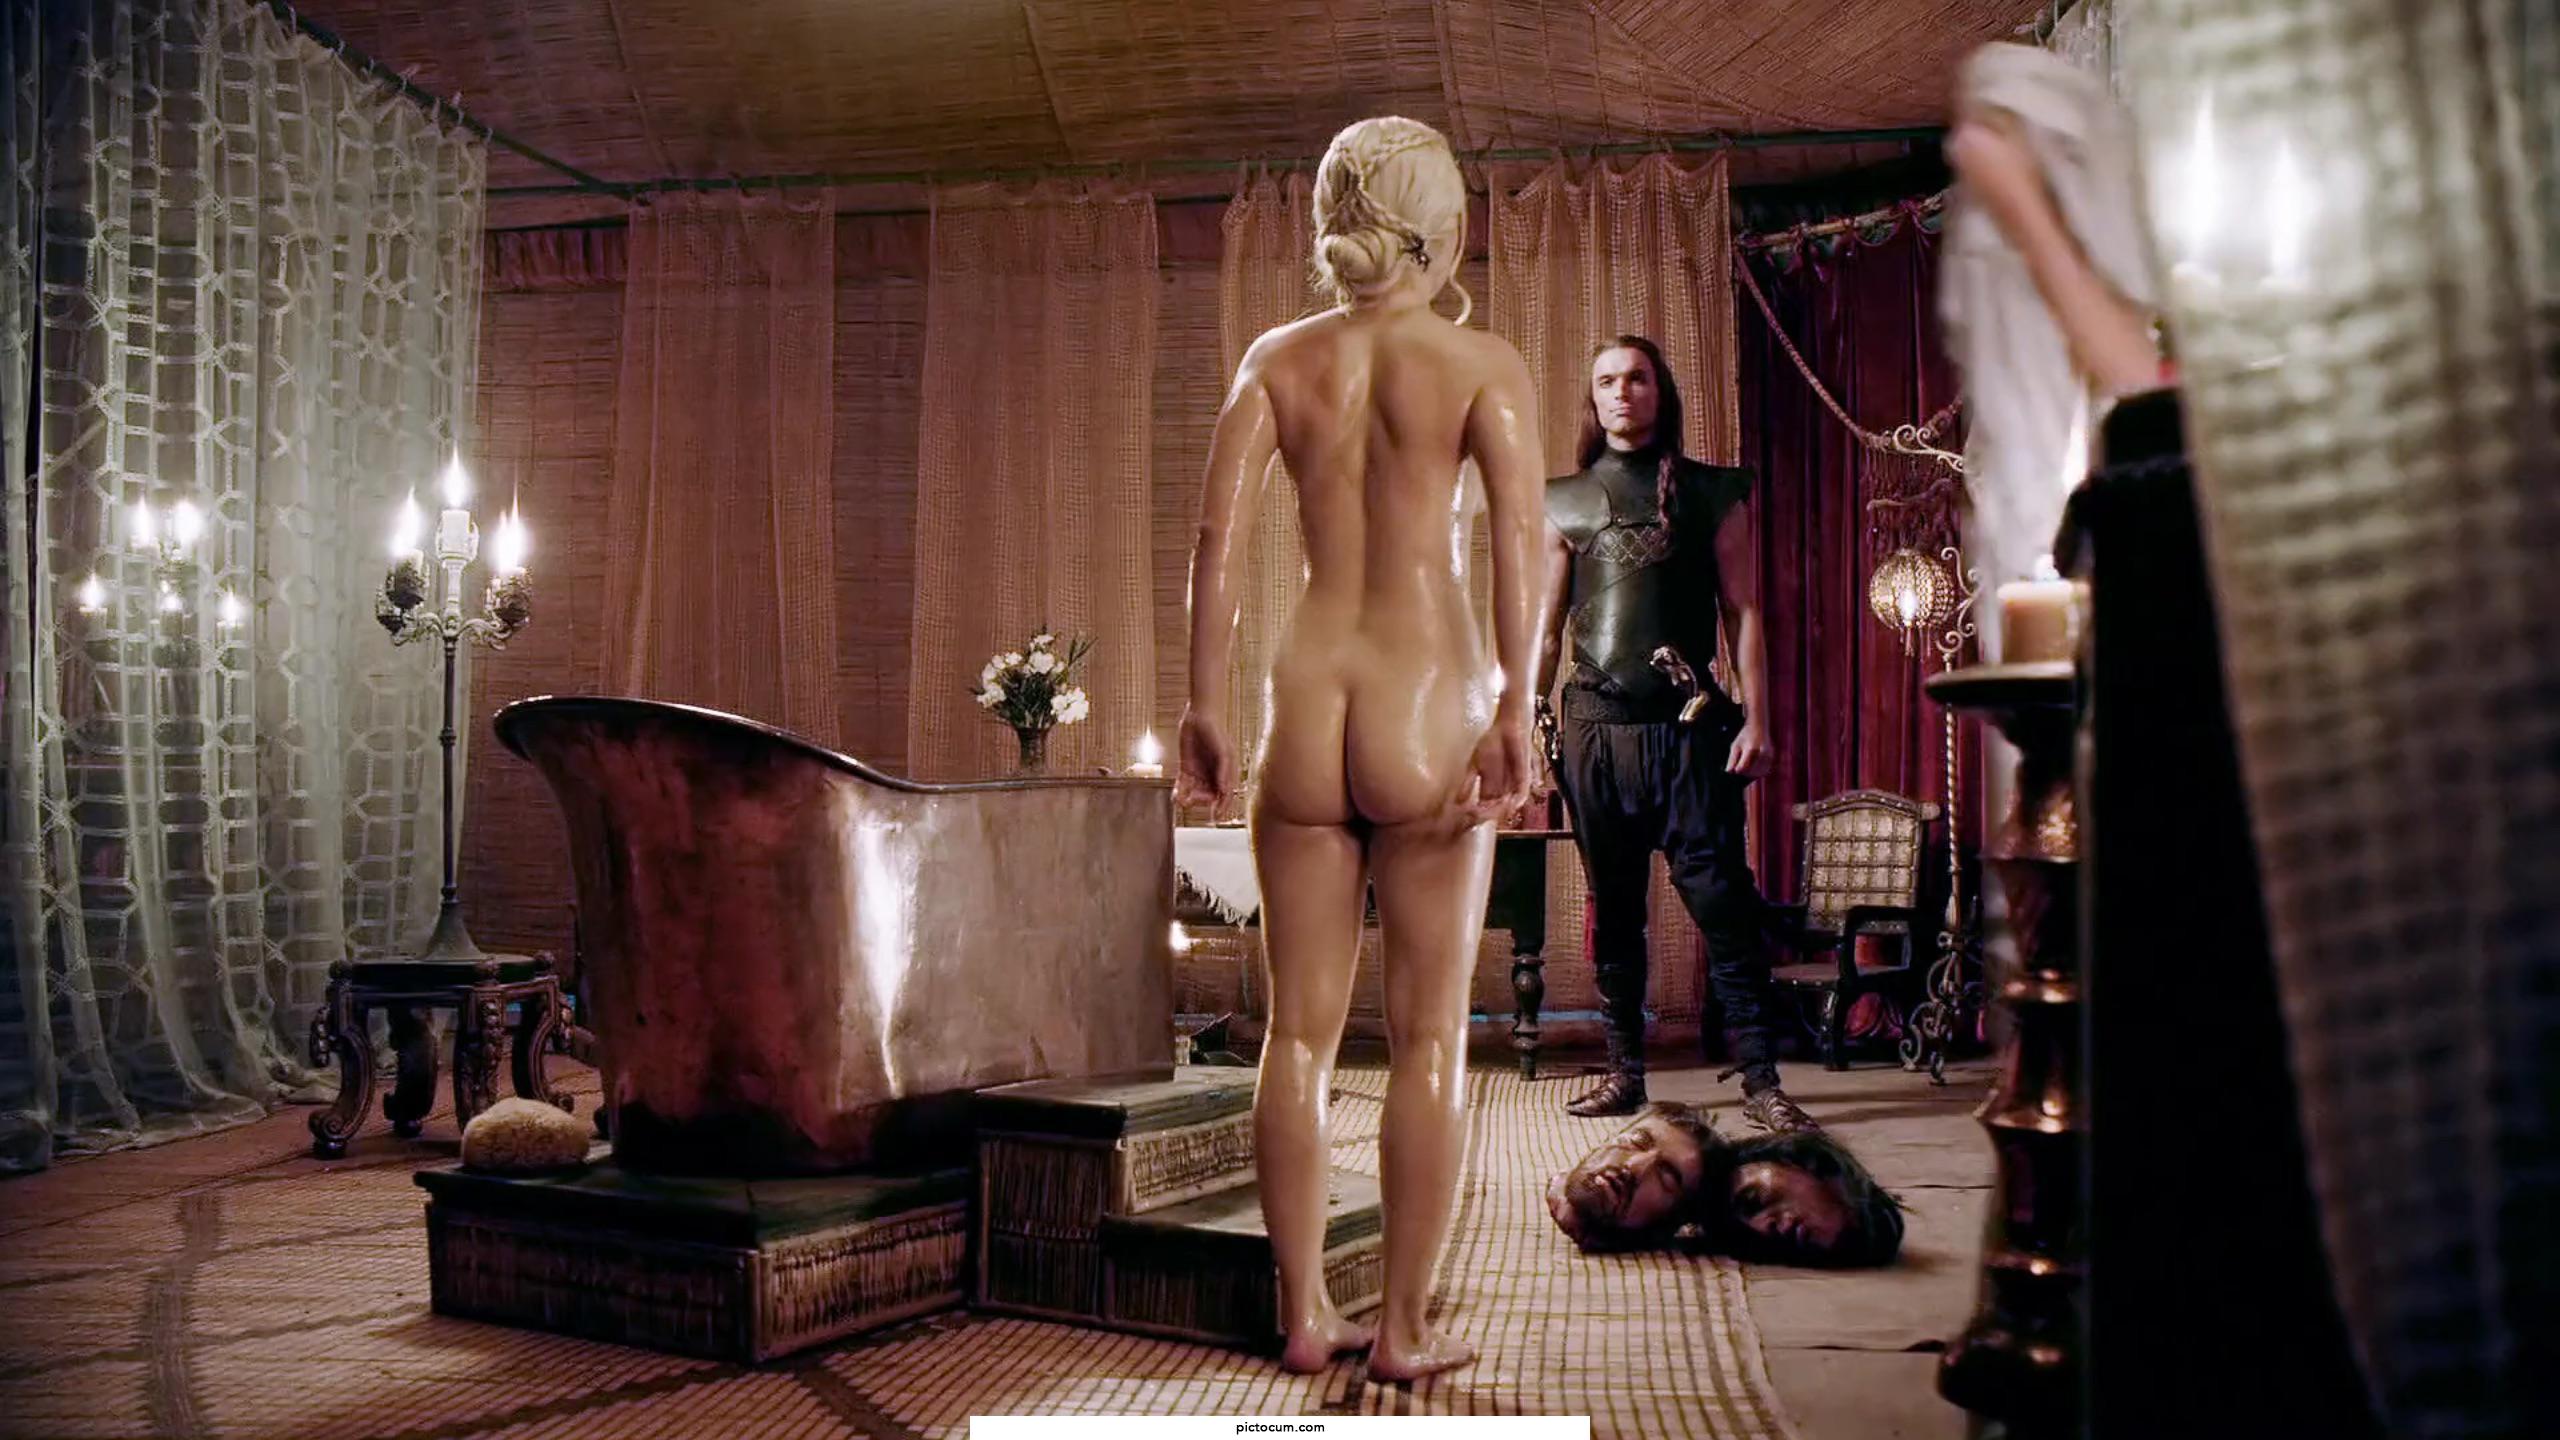 Emilia Clarke standing butt naked in front of Ed Skrein in GOT. Always wondered if she wore a modesty patch in this scene.